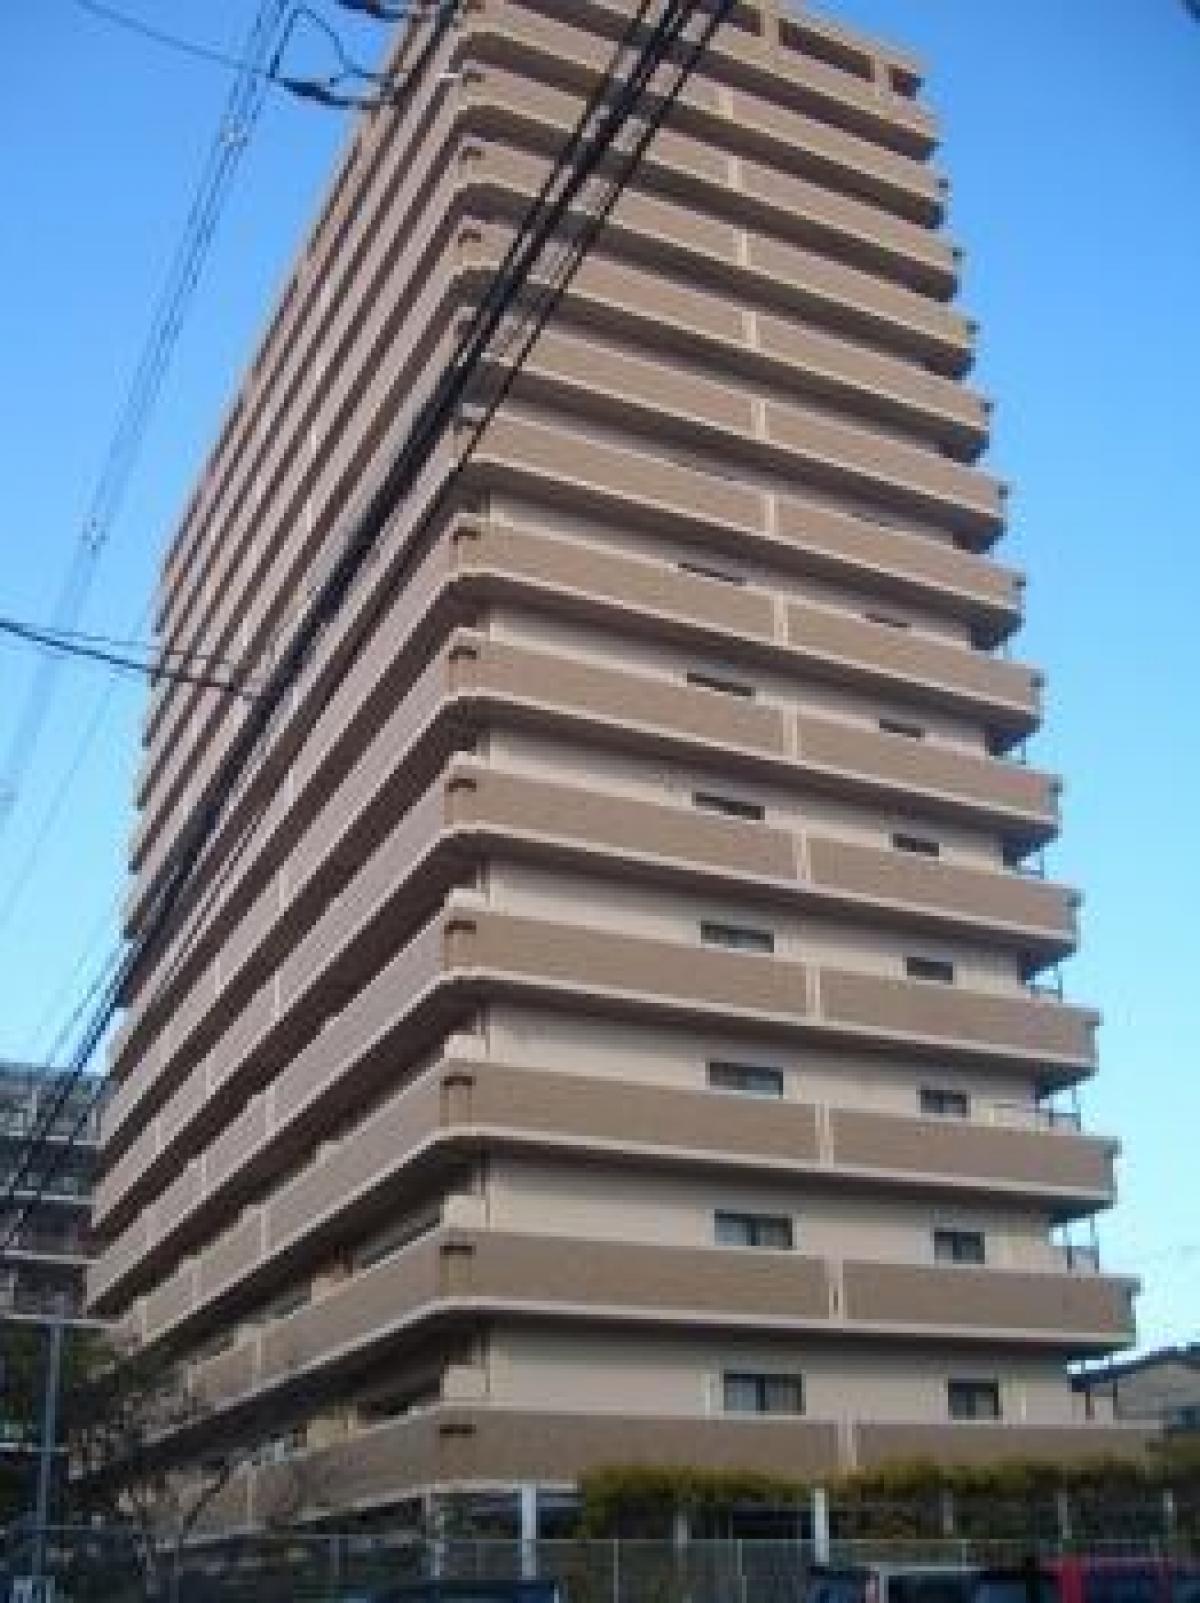 Picture of Apartment For Sale in Neyagawa Shi, Osaka, Japan